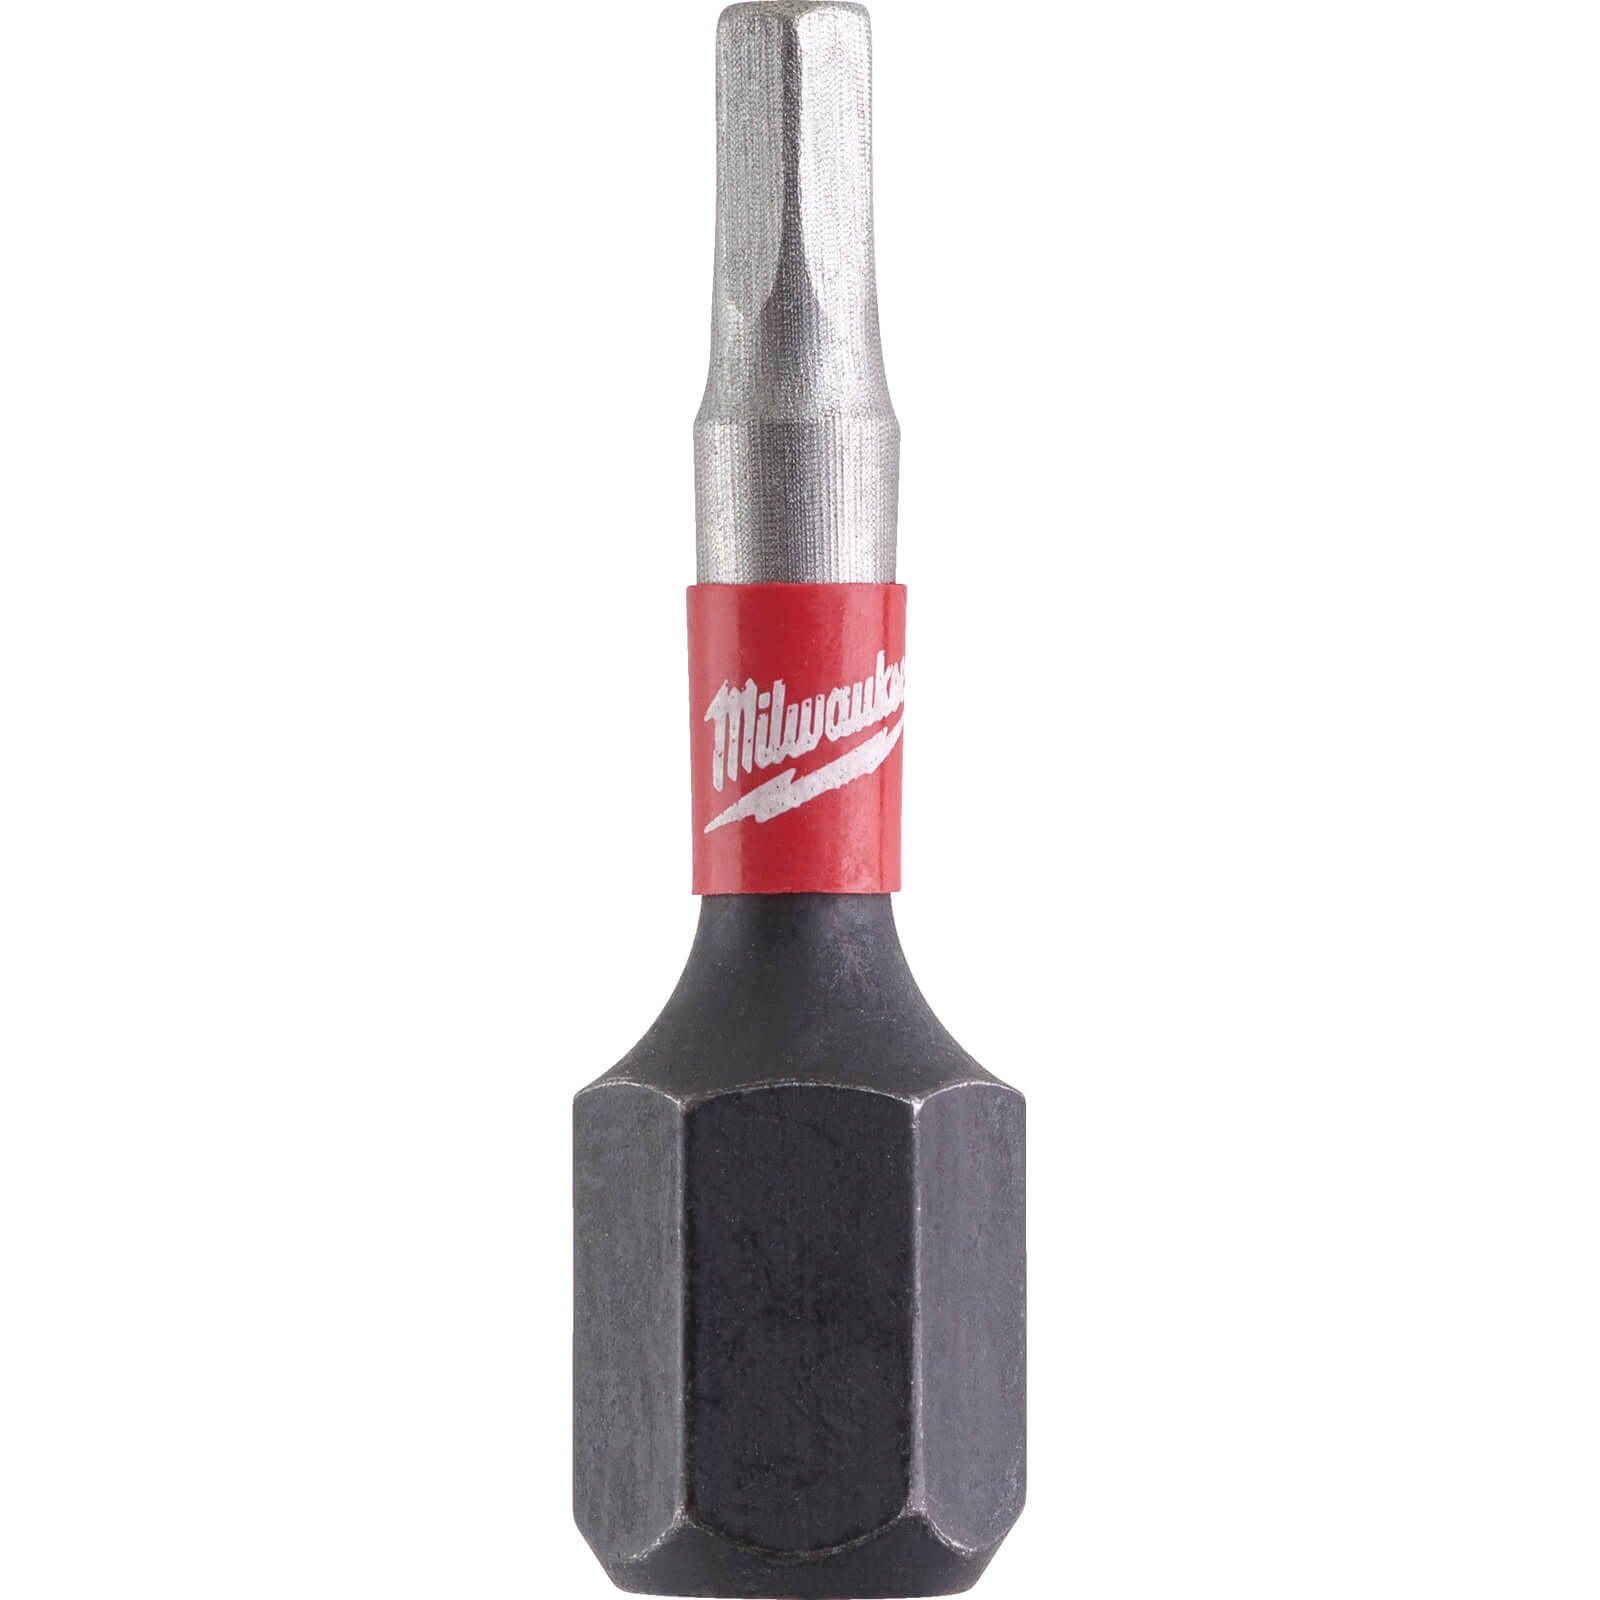 Milwaukee Shockwave Impact Duty Hex Screwdriver Bits Hex 2.5mm 25mm Pack of 2